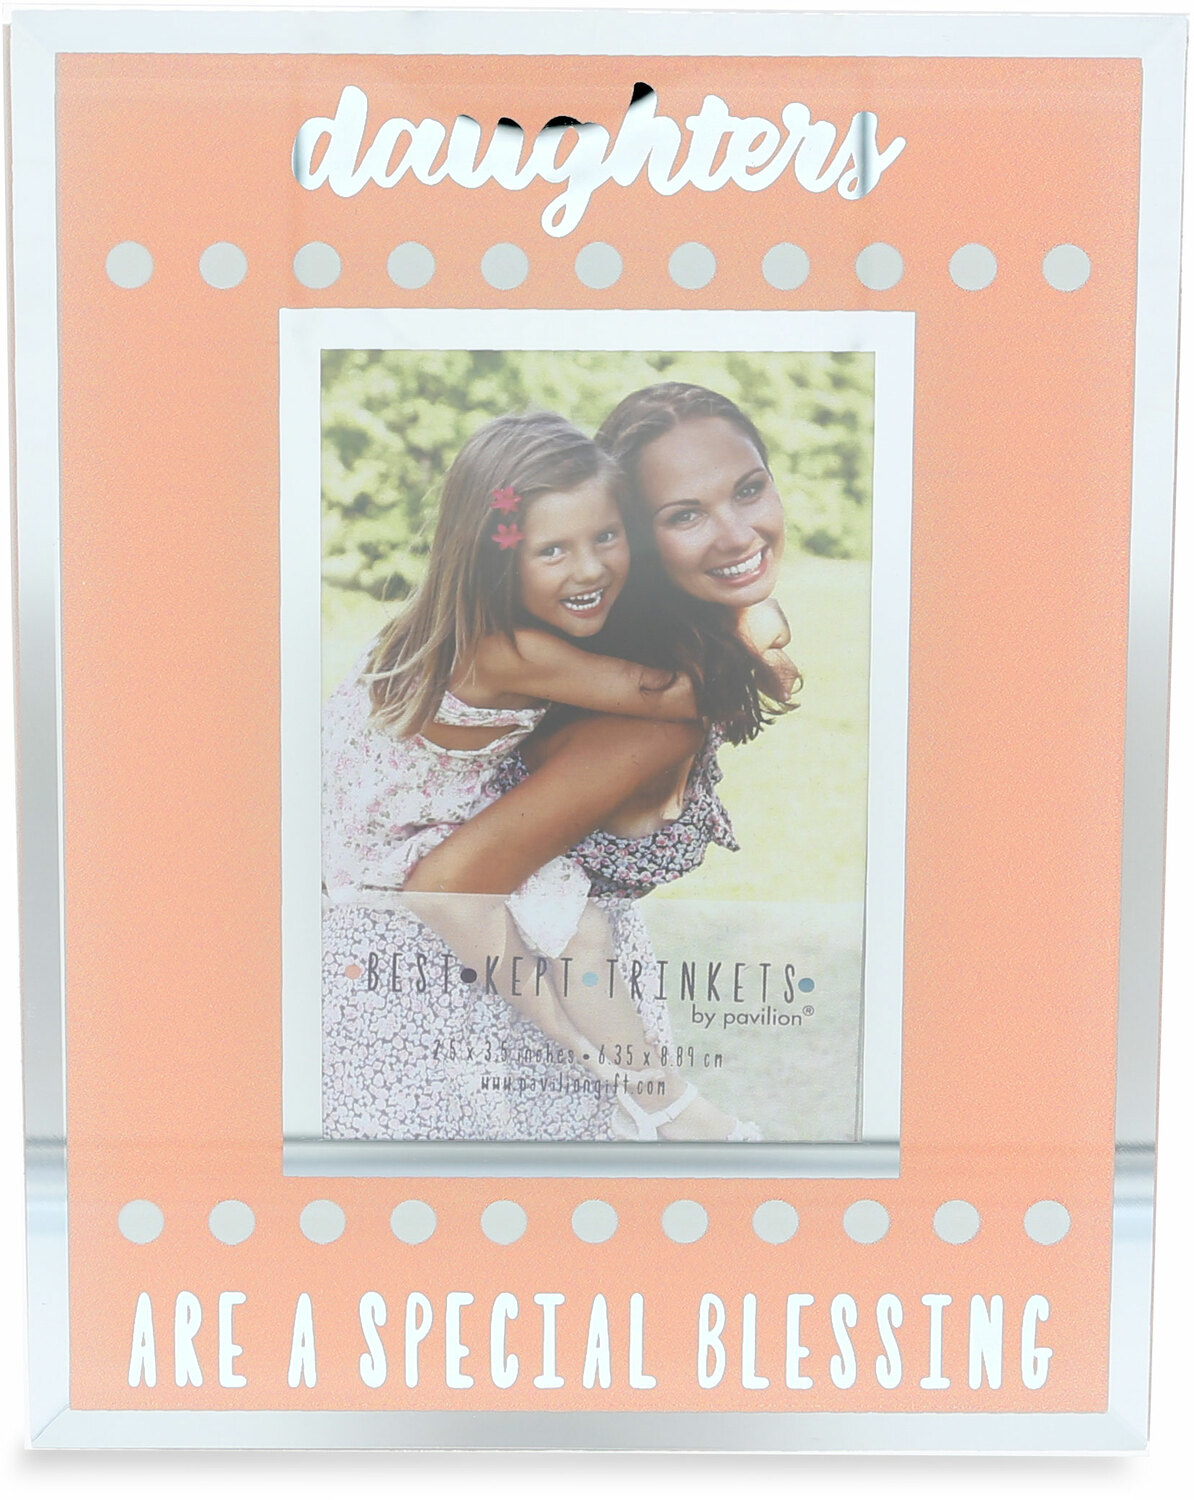 Daughters by Best Kept Trinkets - Daughters - 4.75" X 6" Frame
(Holds a 2.5" X 3.5" Photo)